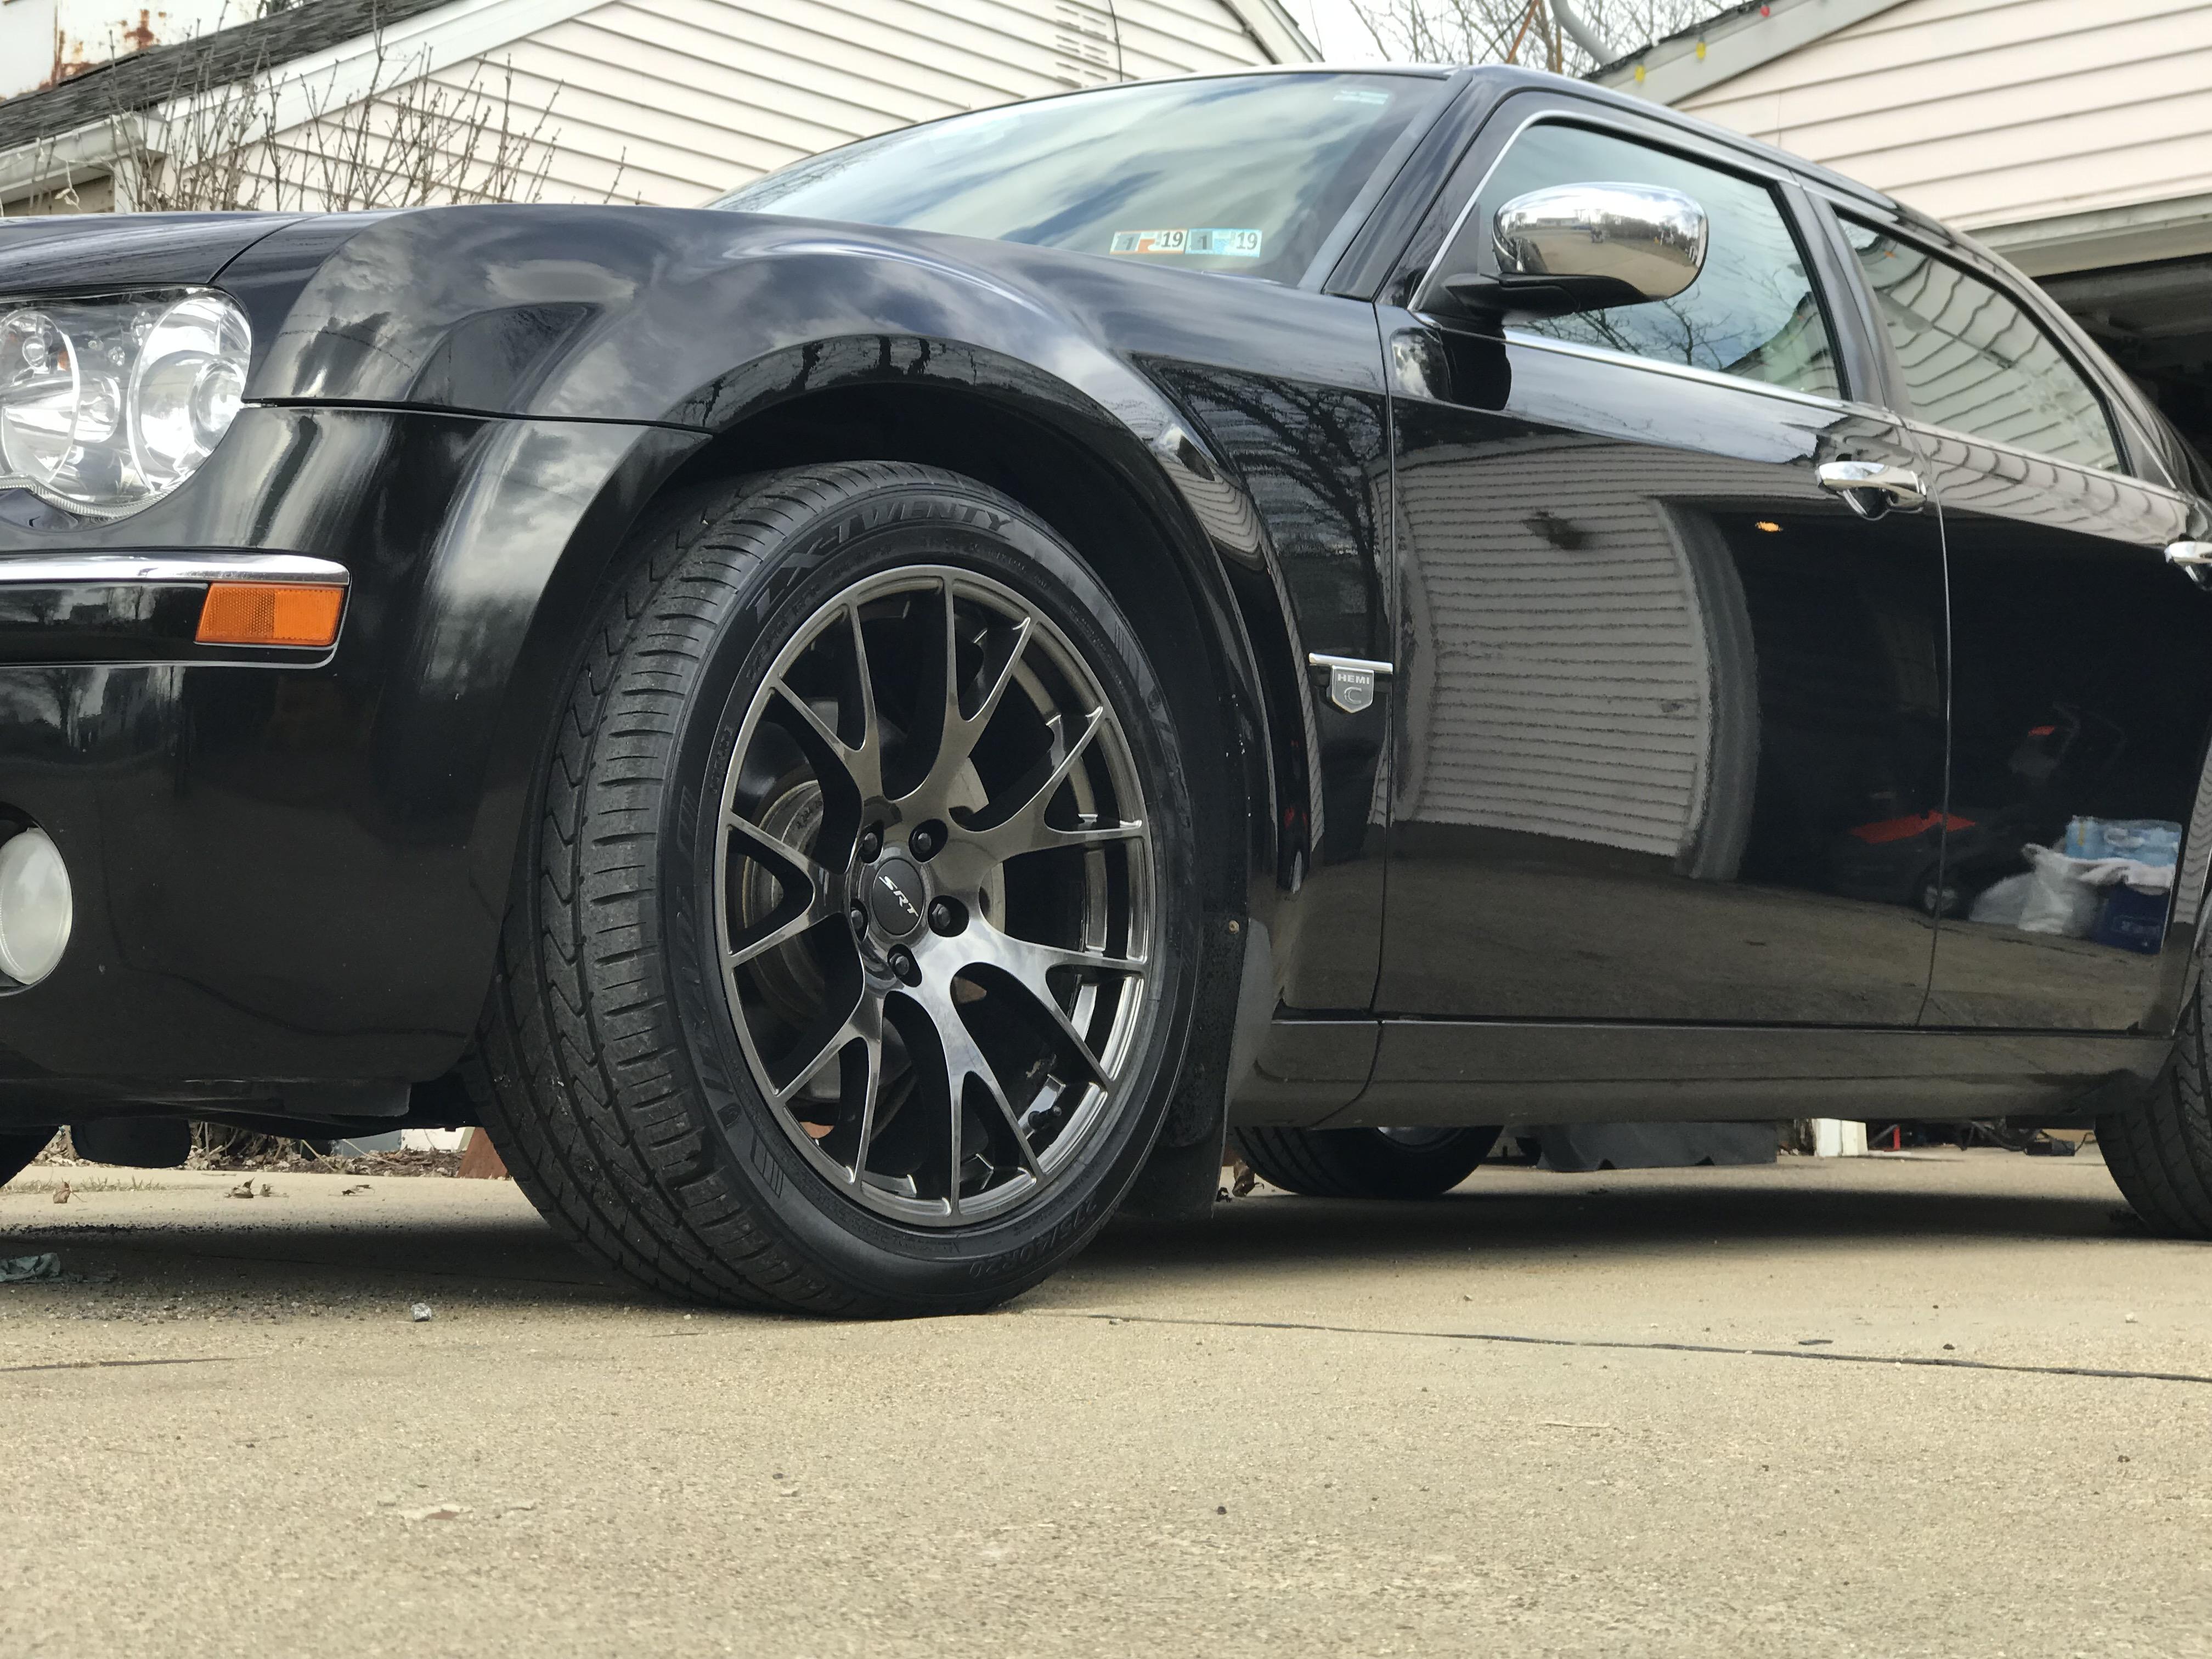 Hellcat Replica Wheels 20x9 W/ Atturo AZ850 275 40 20 Wheel & Tire Package(Many Finishes) (Dodge Charger / Challenger Fitment)